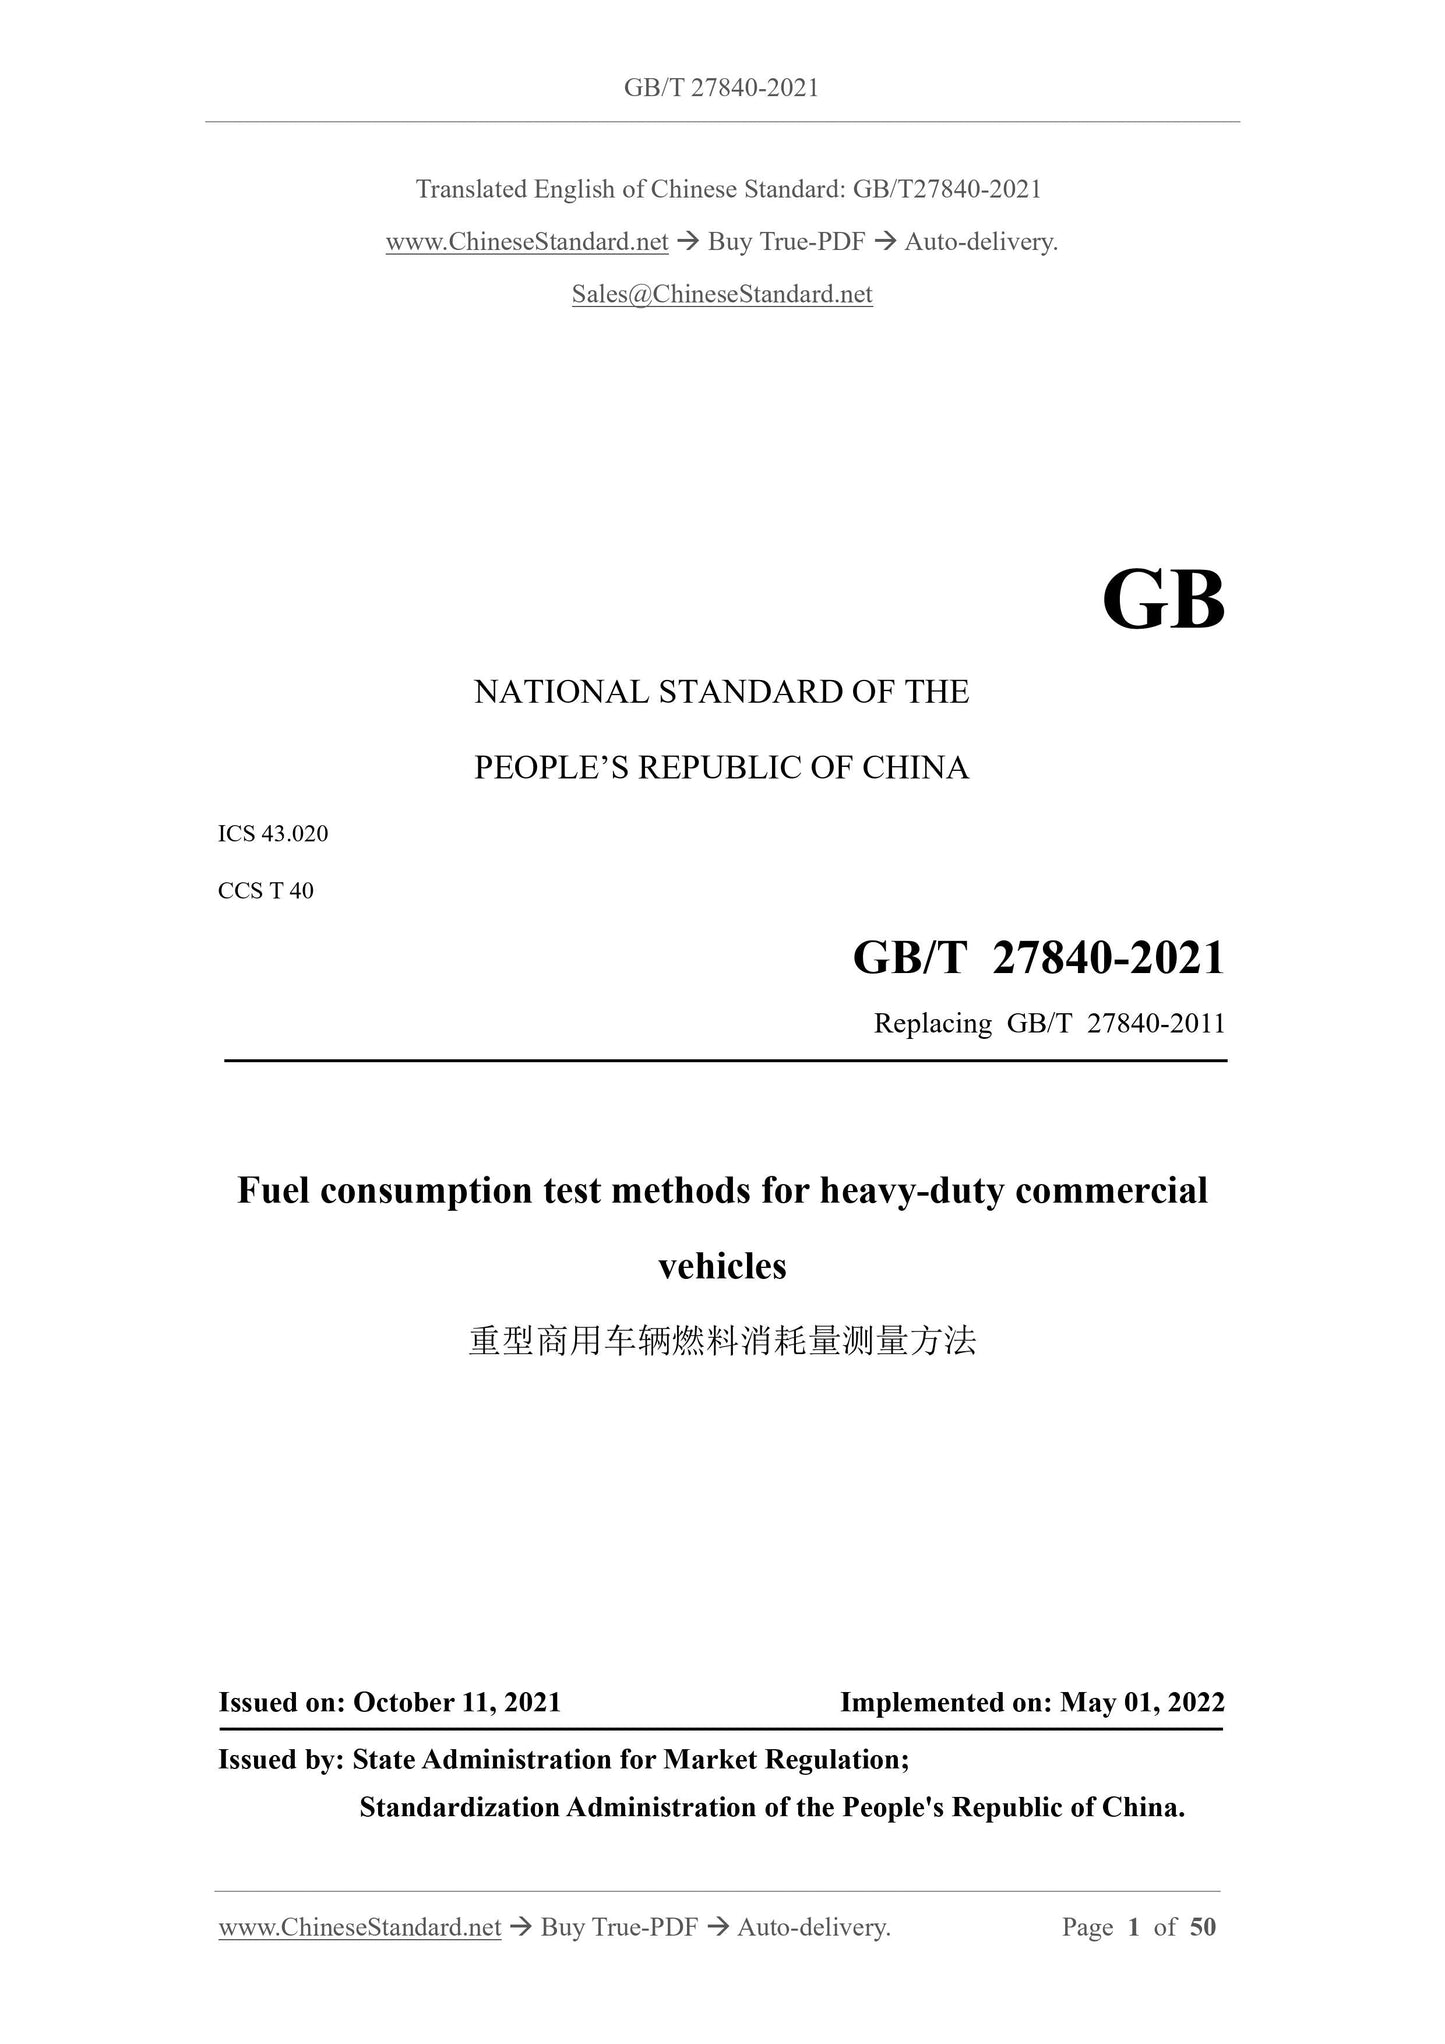 GB/T 27840-2021 Page 1